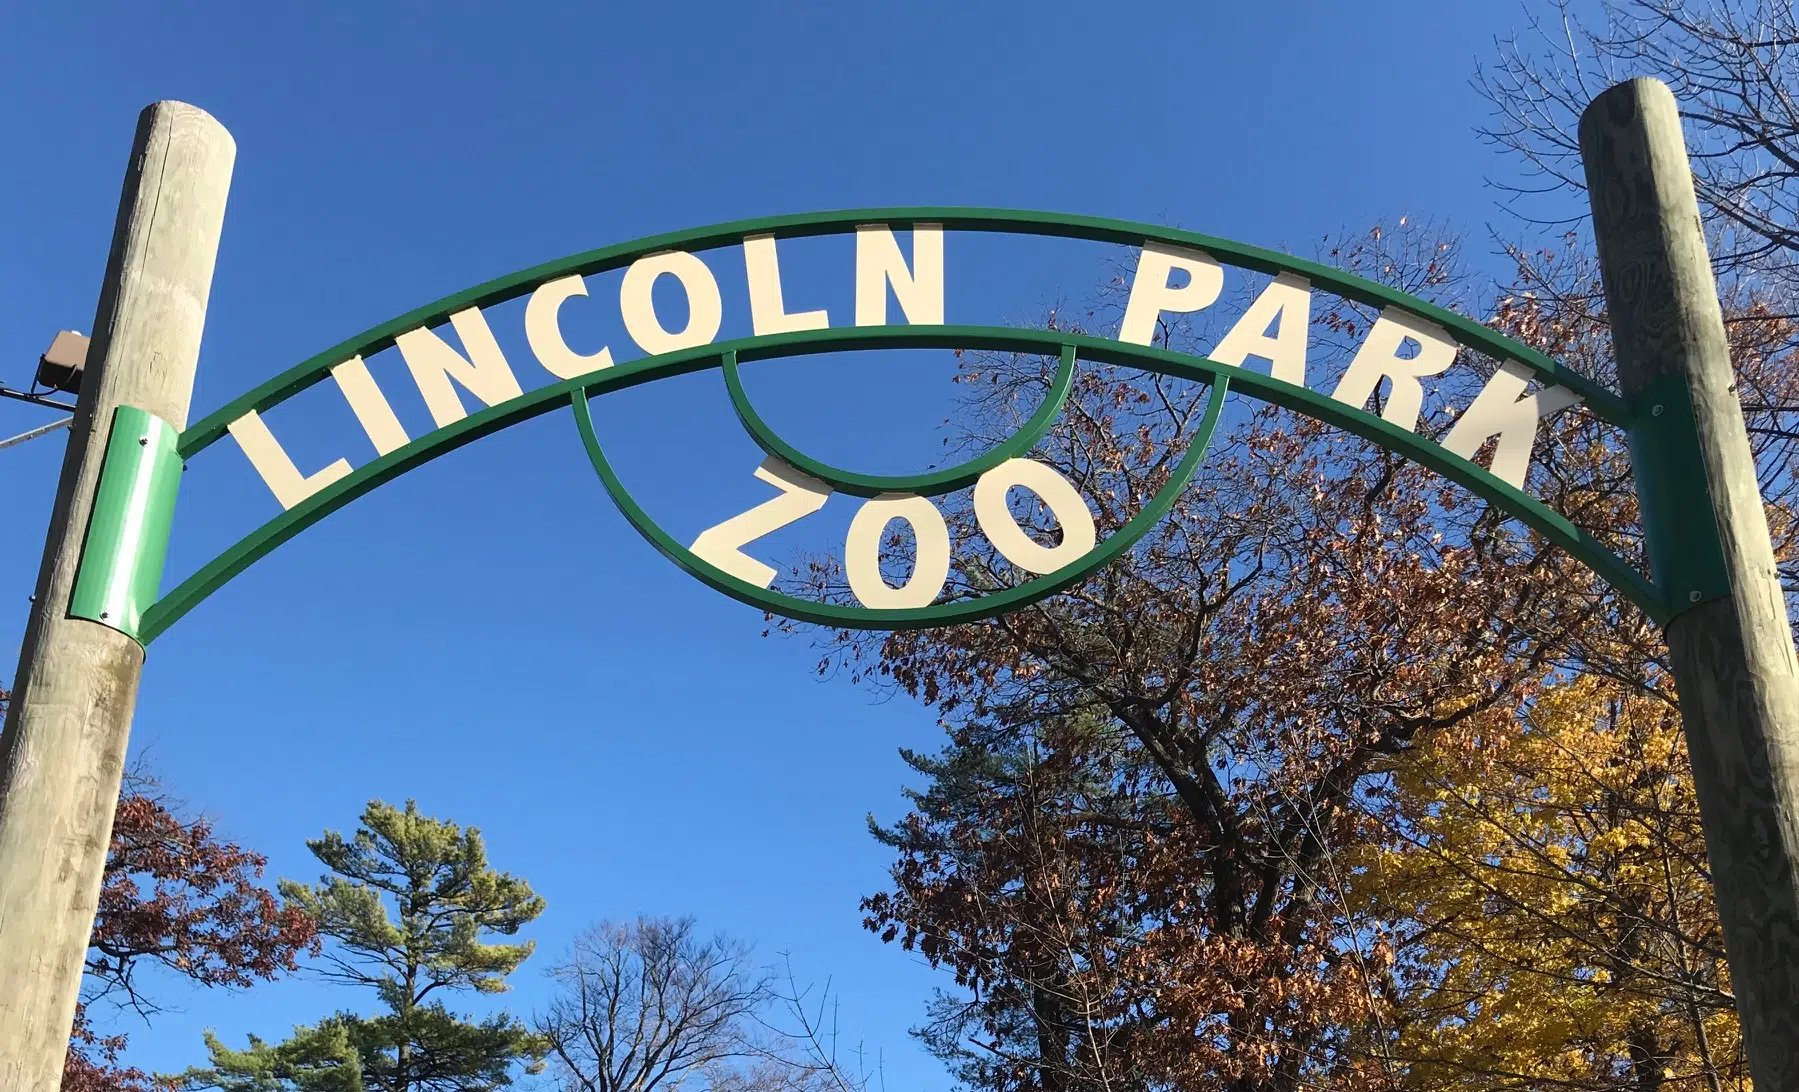 New Exhibit Coming to Lincoln Park Zoo